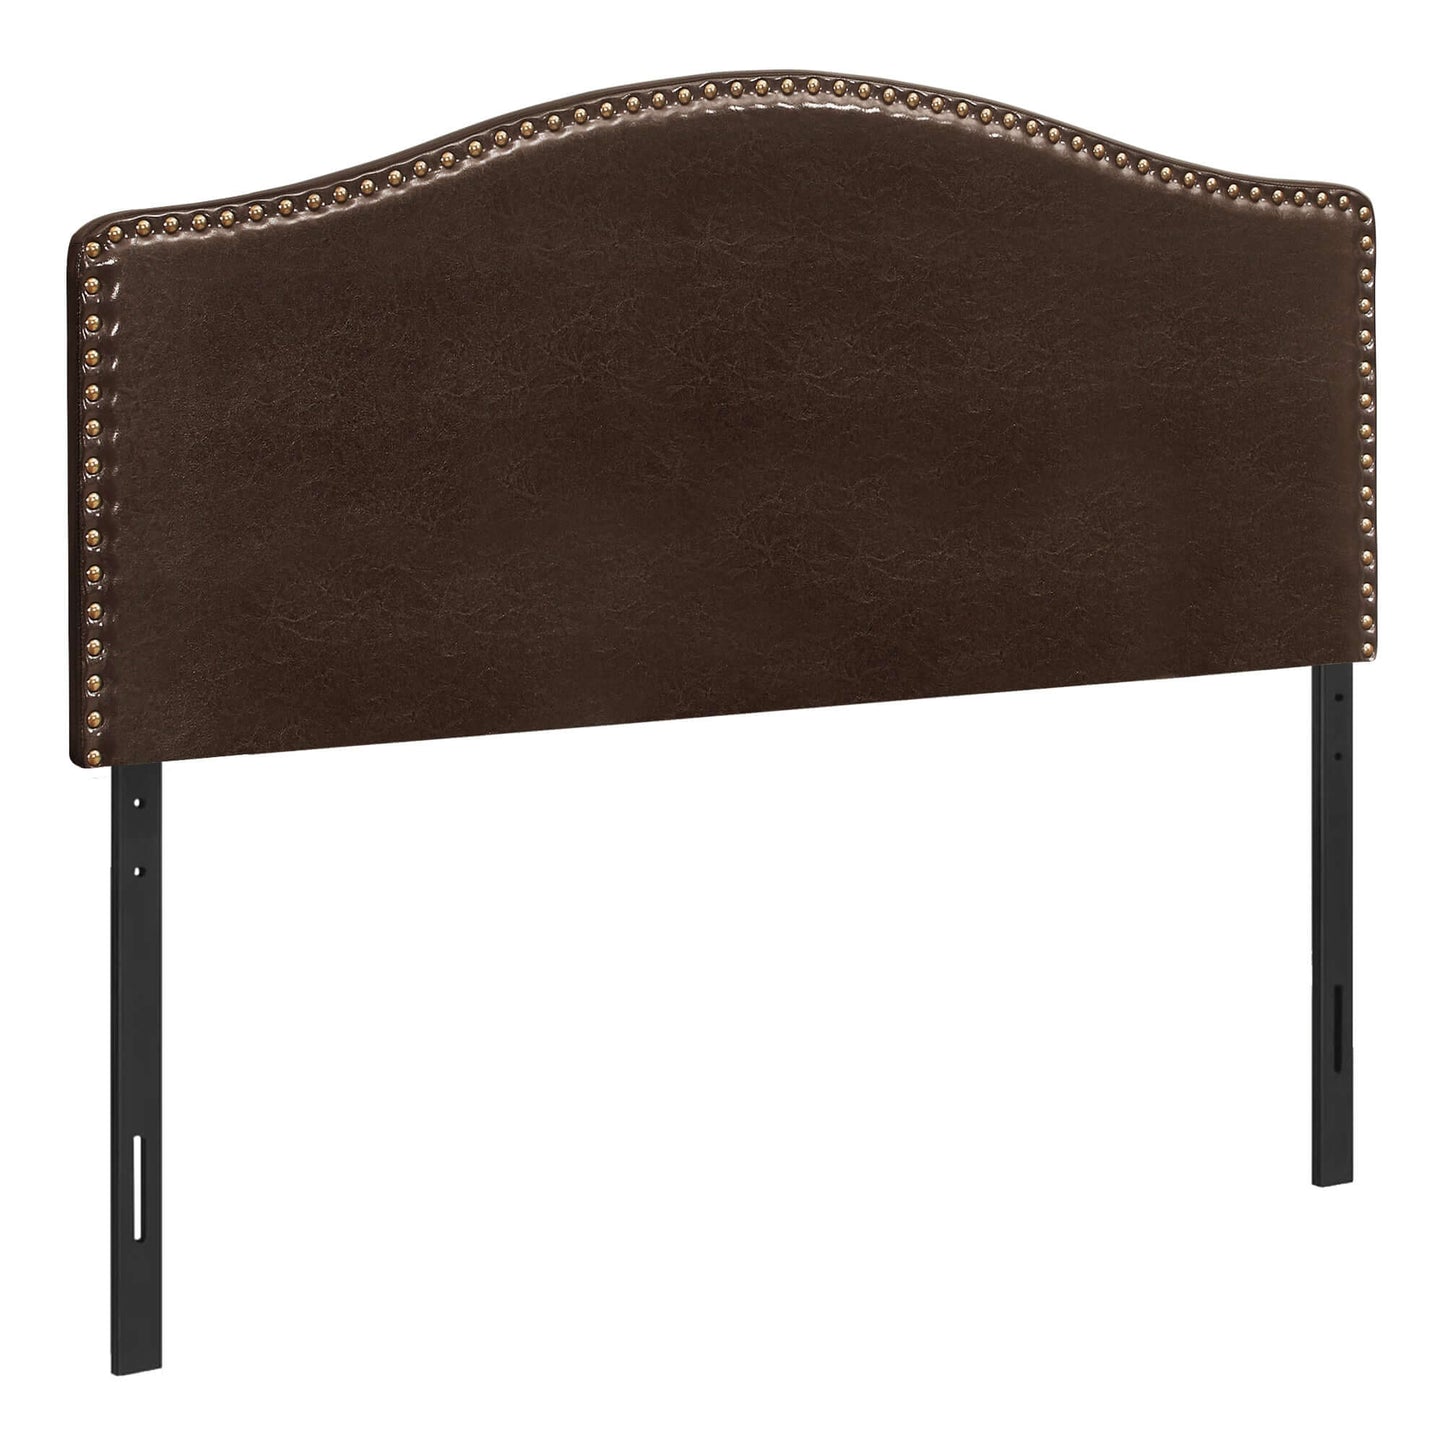 Monarch Specialties - Transitional Upholstered Arched Top Headboard in Brown Leather-Look Fabric - I 6010F